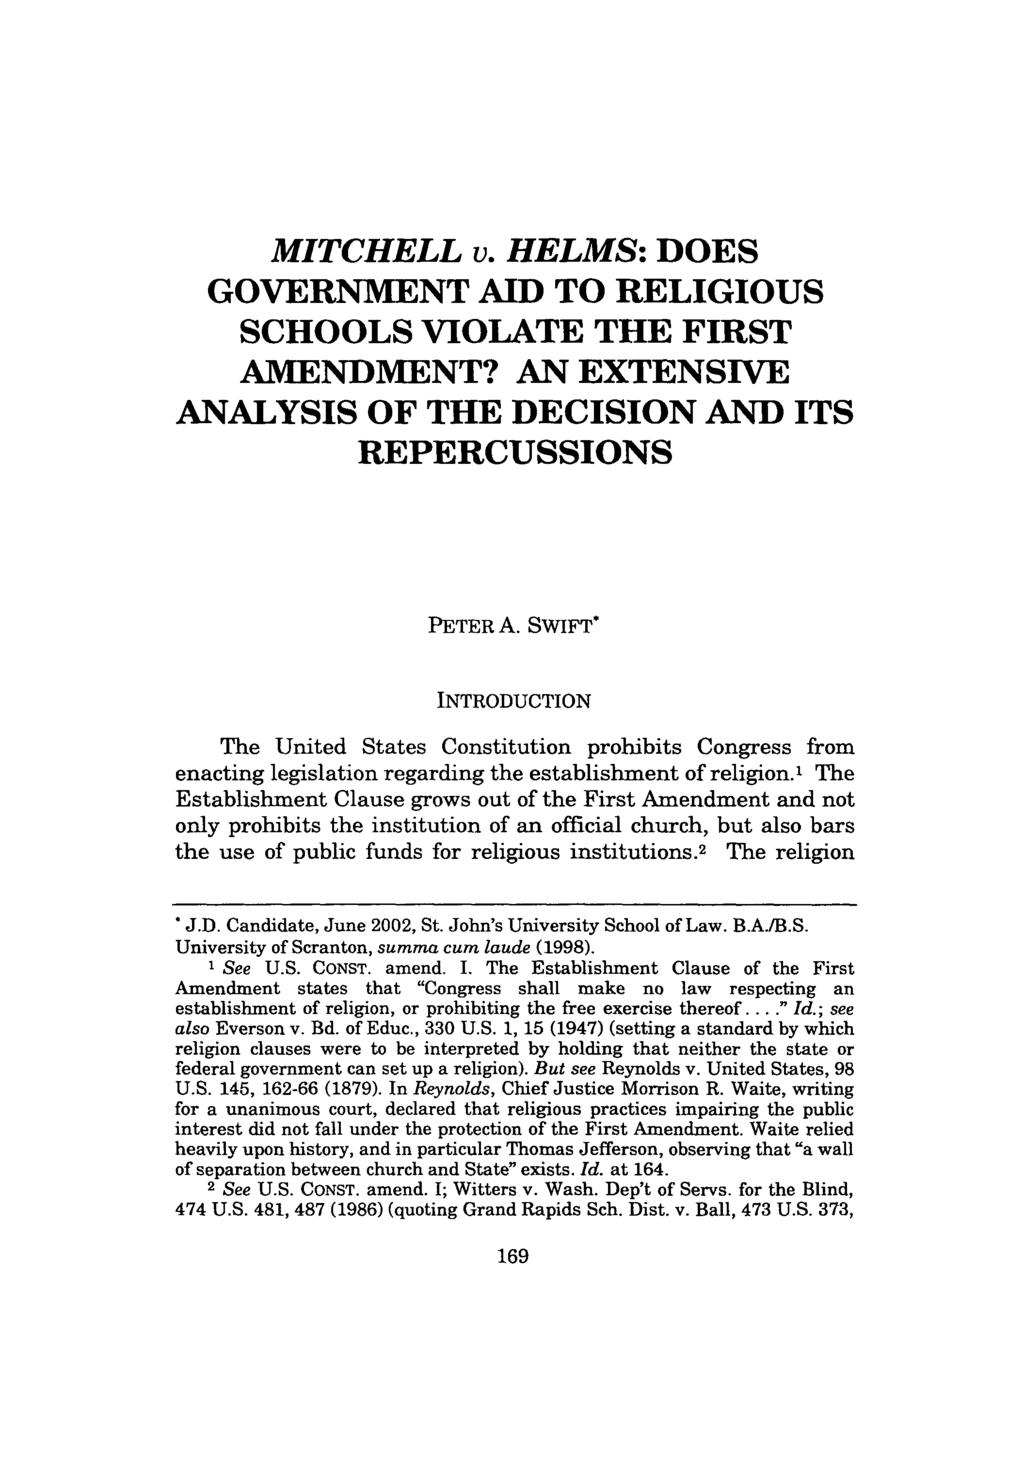 MITCHELL v. HELMS: DOES GOVERNMENT AID TO RELIGIOUS SCHOOLS VIOLATE THE FIRST AMENDMENT? AN EXTENSIVE ANALYSIS OF THE DECISION AND ITS REPERCUSSIONS PETER A.